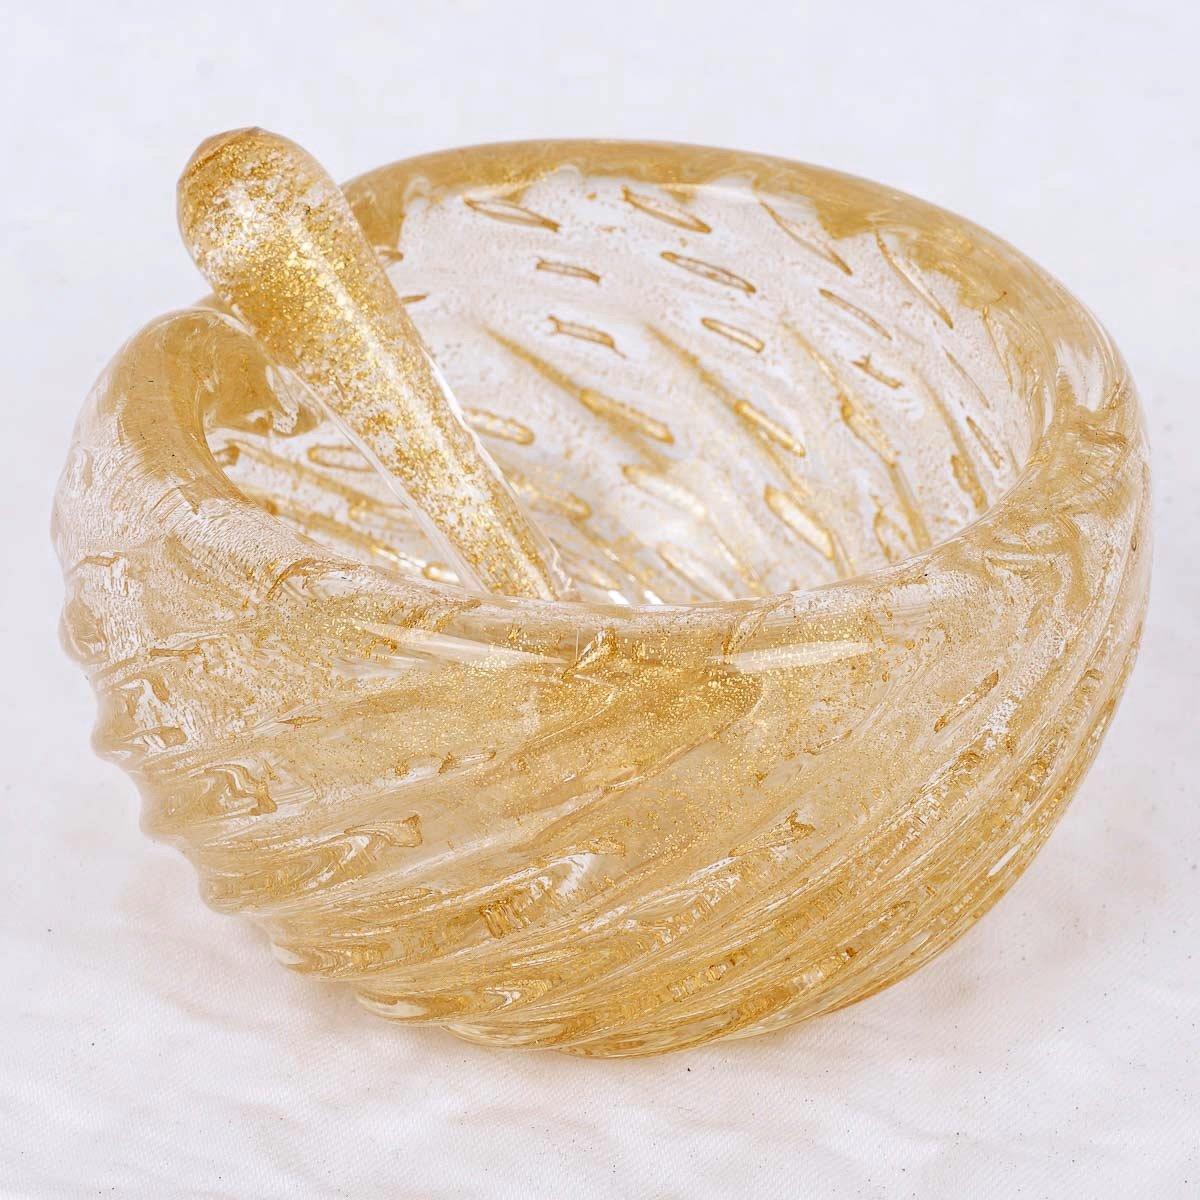 Charming little mortar and pestle, worked with tongs and gold flakes, Barovier & Toso, Murano Italy

Period: 20th Century
Circa : 1950 - 1960
Dimensions : Height : 6cm - Diameter : 10cm
 
Did you know?

Fratelli Barovier was founded in 1878 by